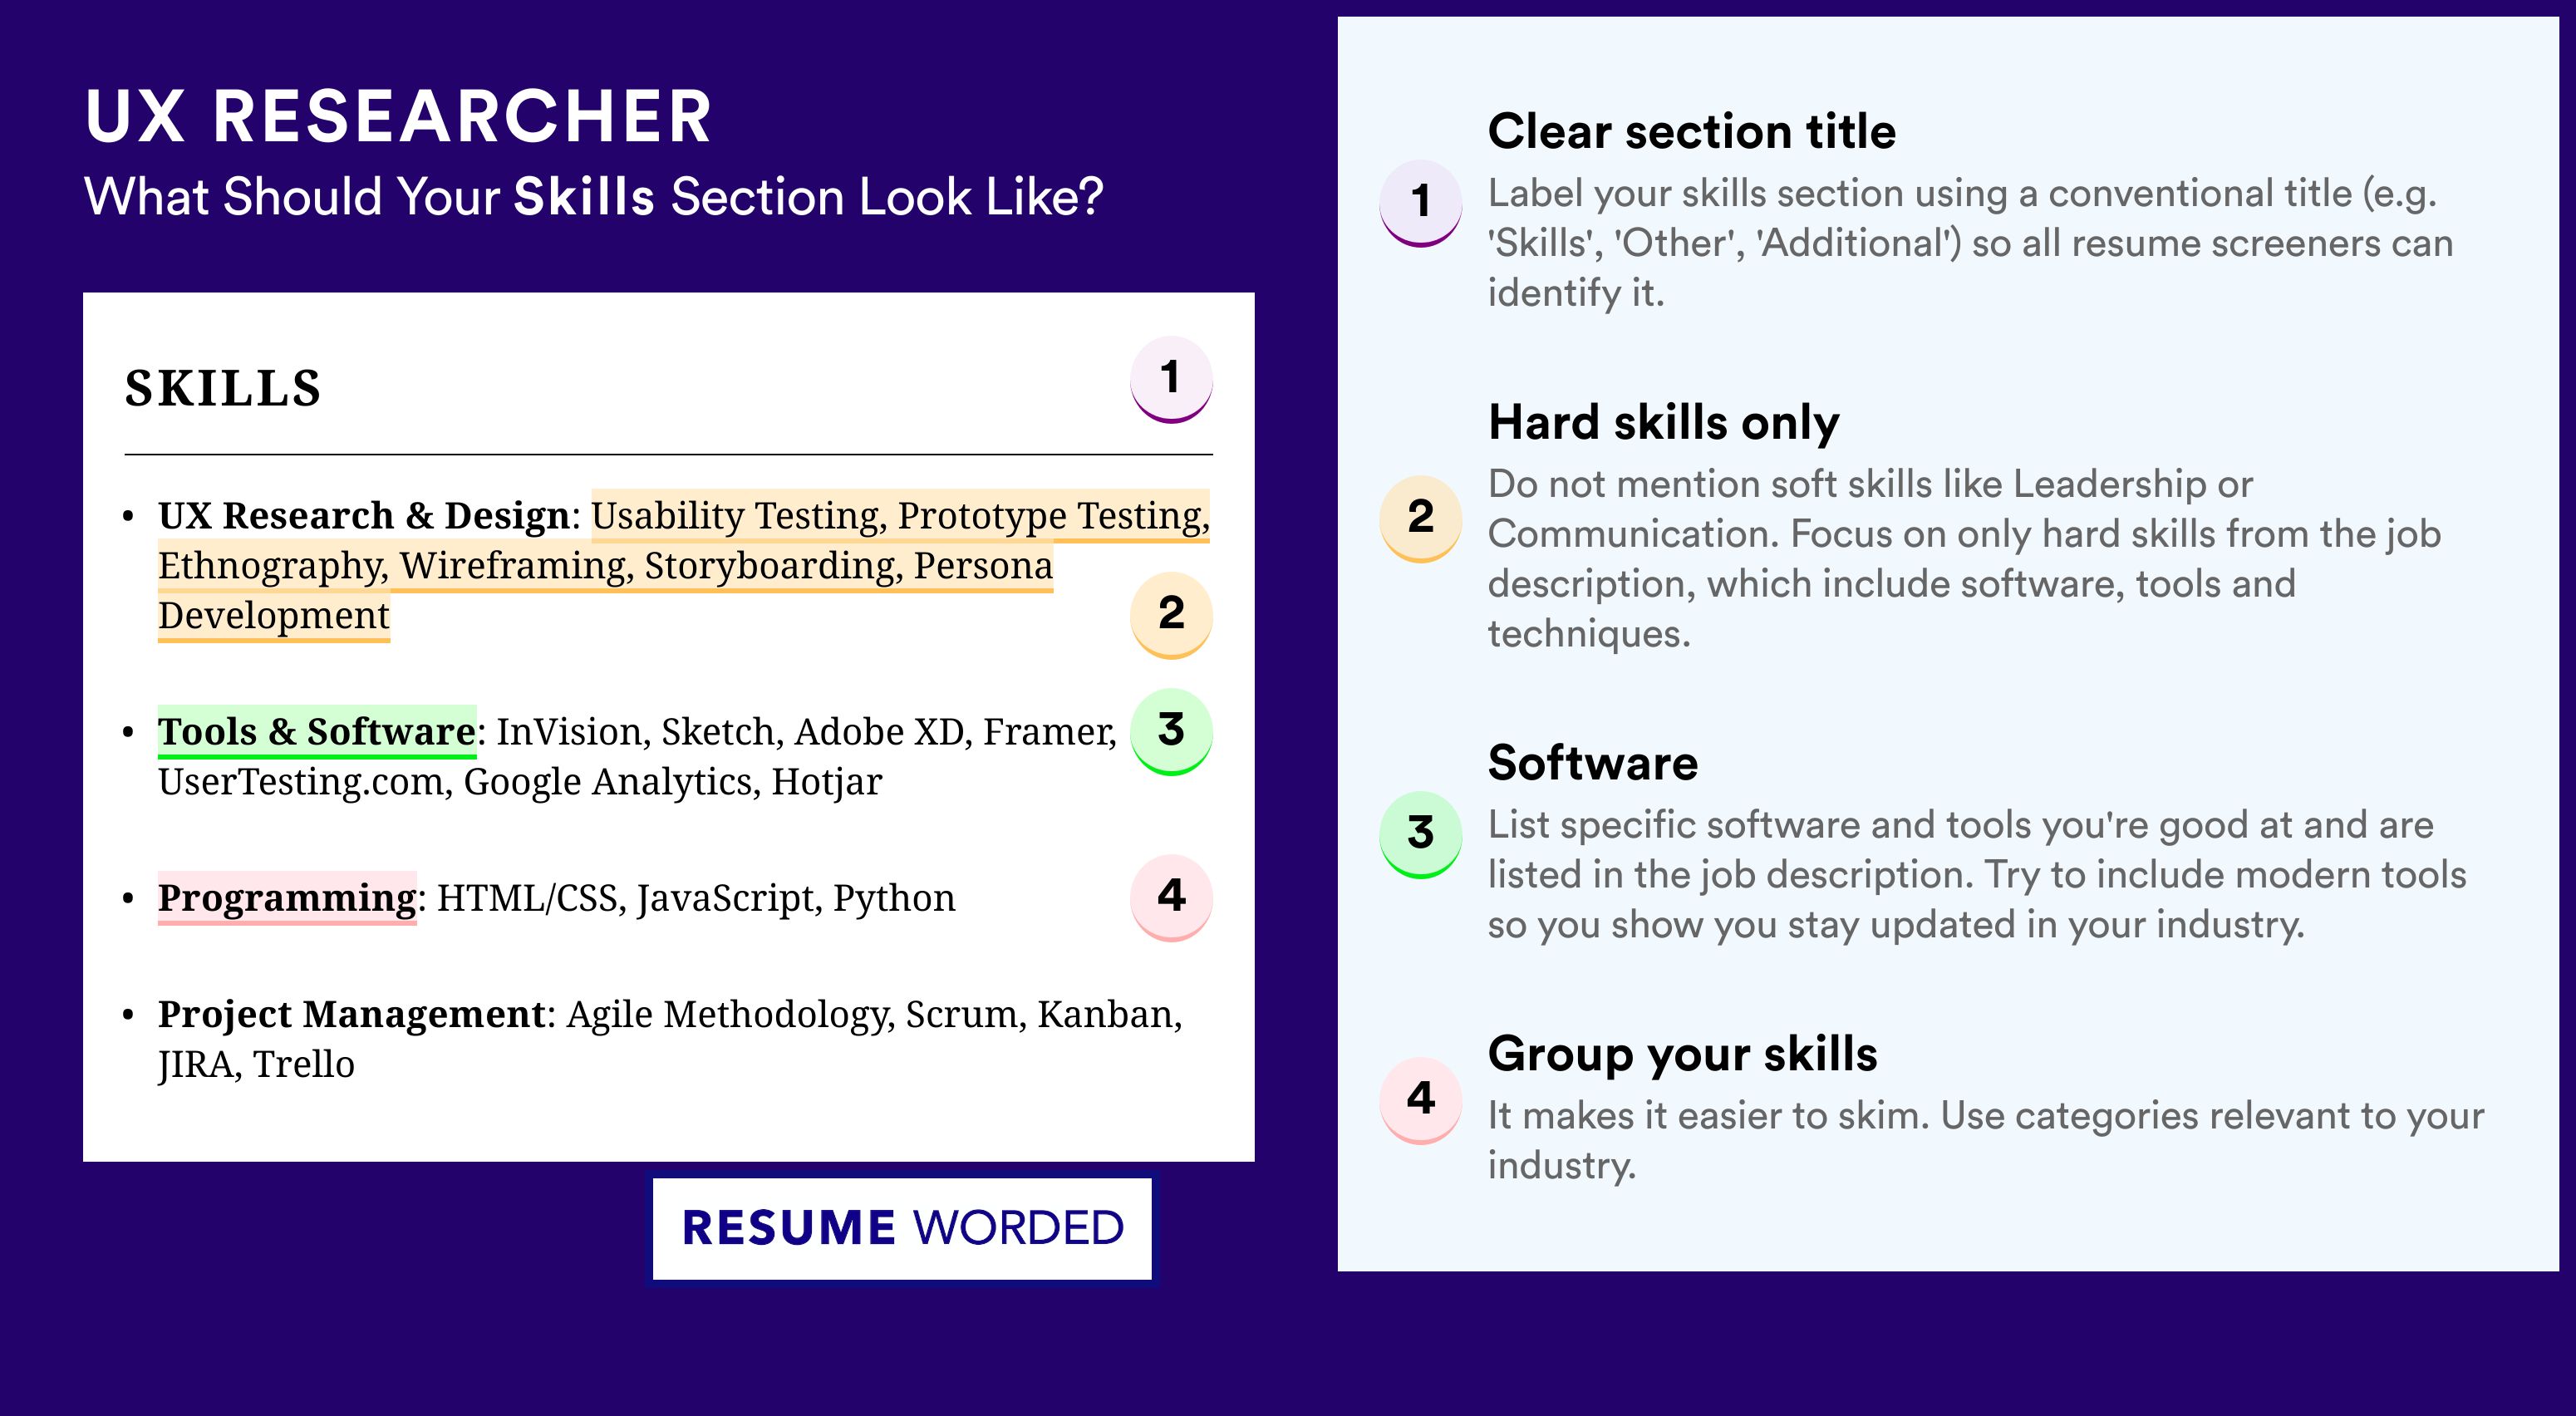 How To Write Your Skills Section - UX Researcher Roles